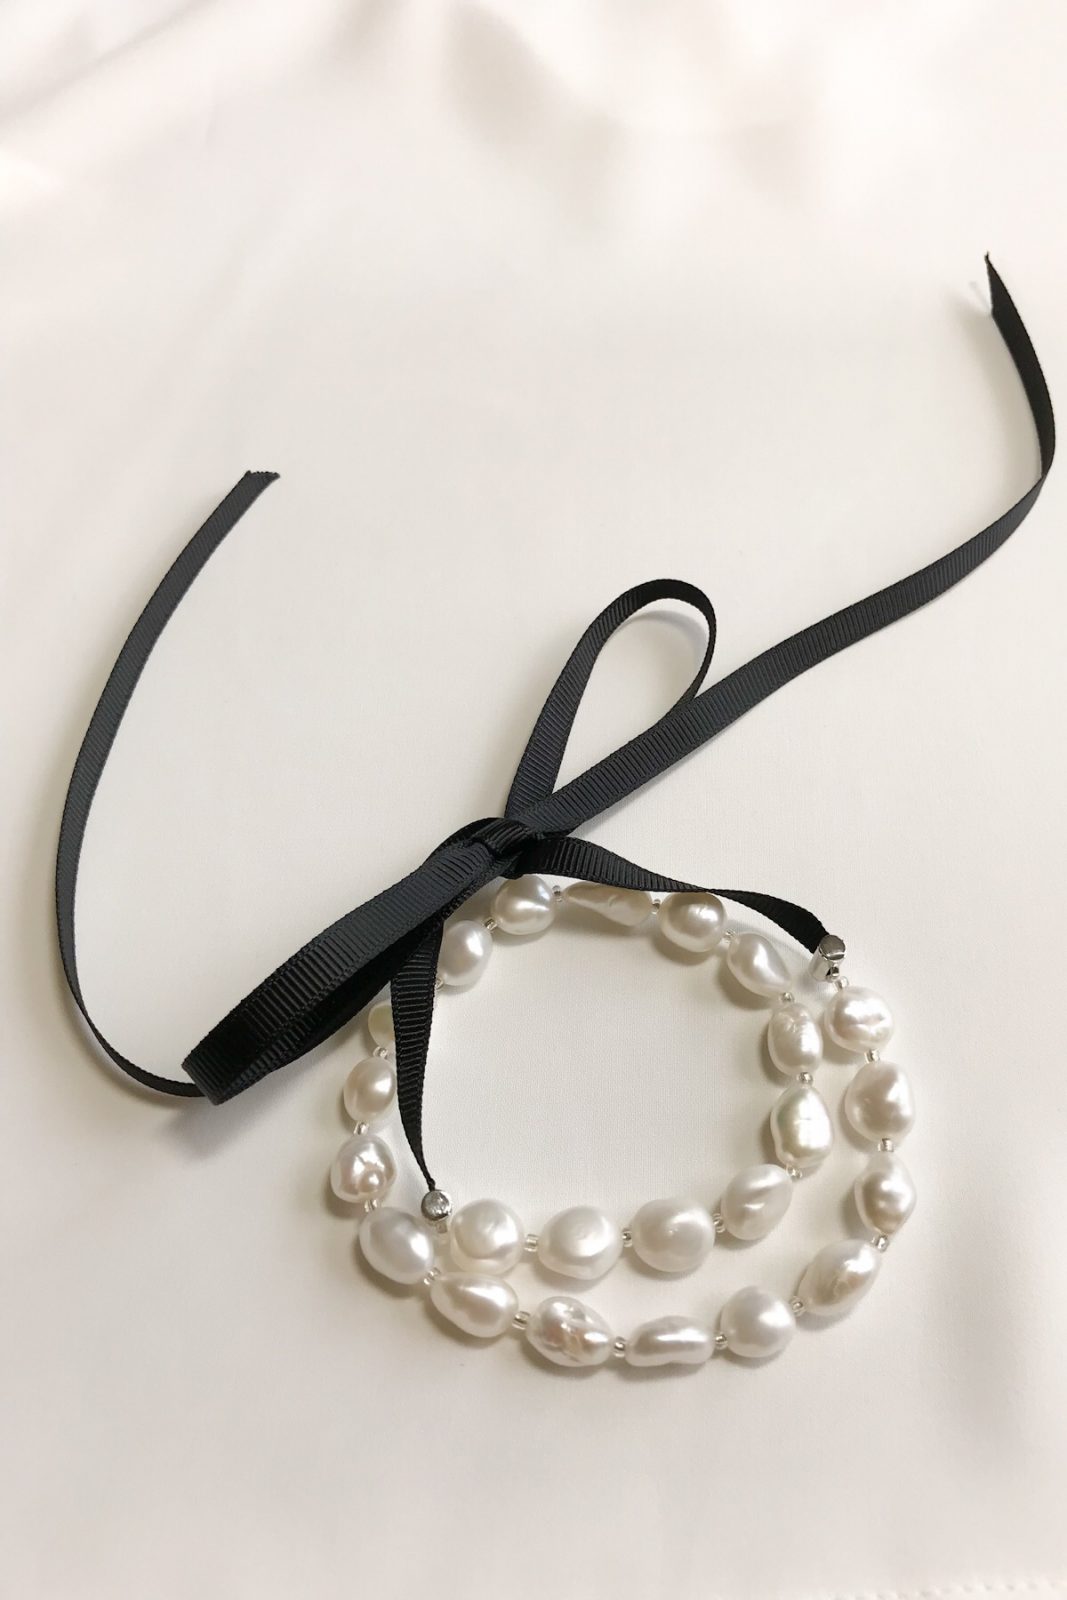 White Pearl Necklace, Ivory Pearl Ribbon Tie Choker, Women's Head Band With  Lace, Birthday Gift, for Bride, Bridesmaid, Black, Pink 